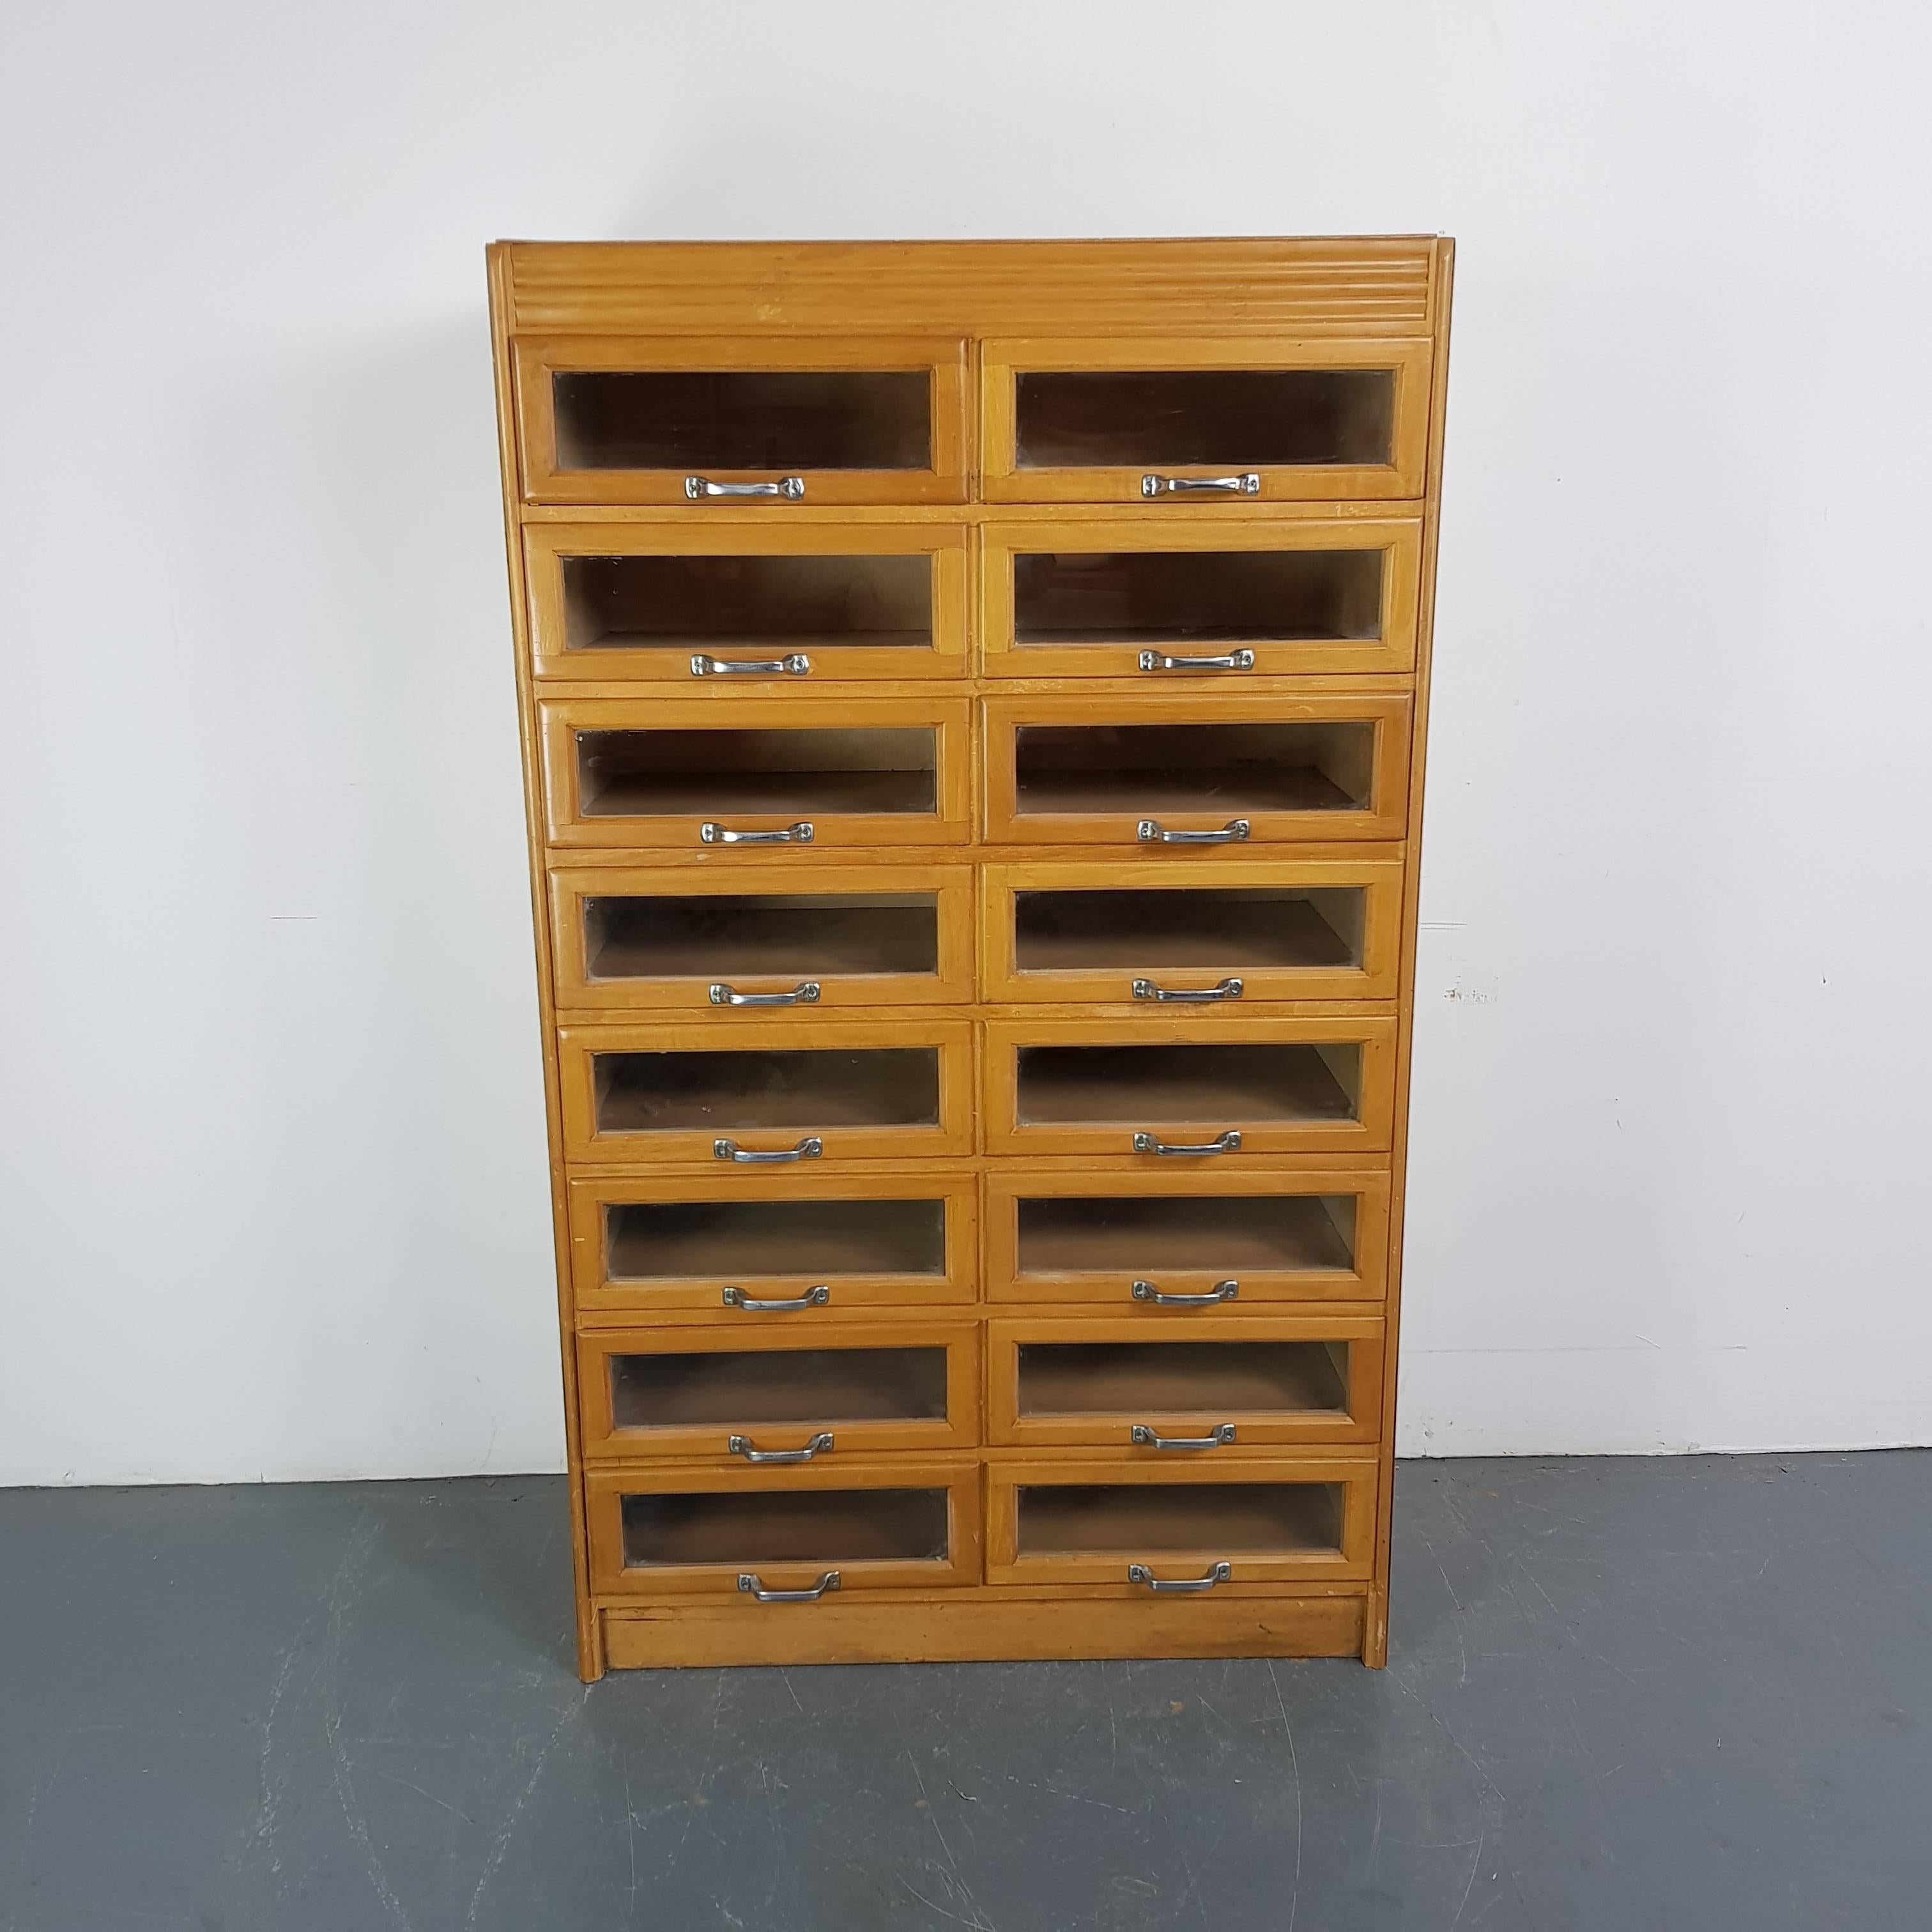 16-drawer haberdashery shop cabinet. 

It has 16 glass fronted drawers all with original metal handles.

Approximate dimensions:

Height: 153cm

Width: 91cm

Depth: 49cm

Glass fronted drawers: 40cm W x 38cm D x 13cm H.

Overall, in